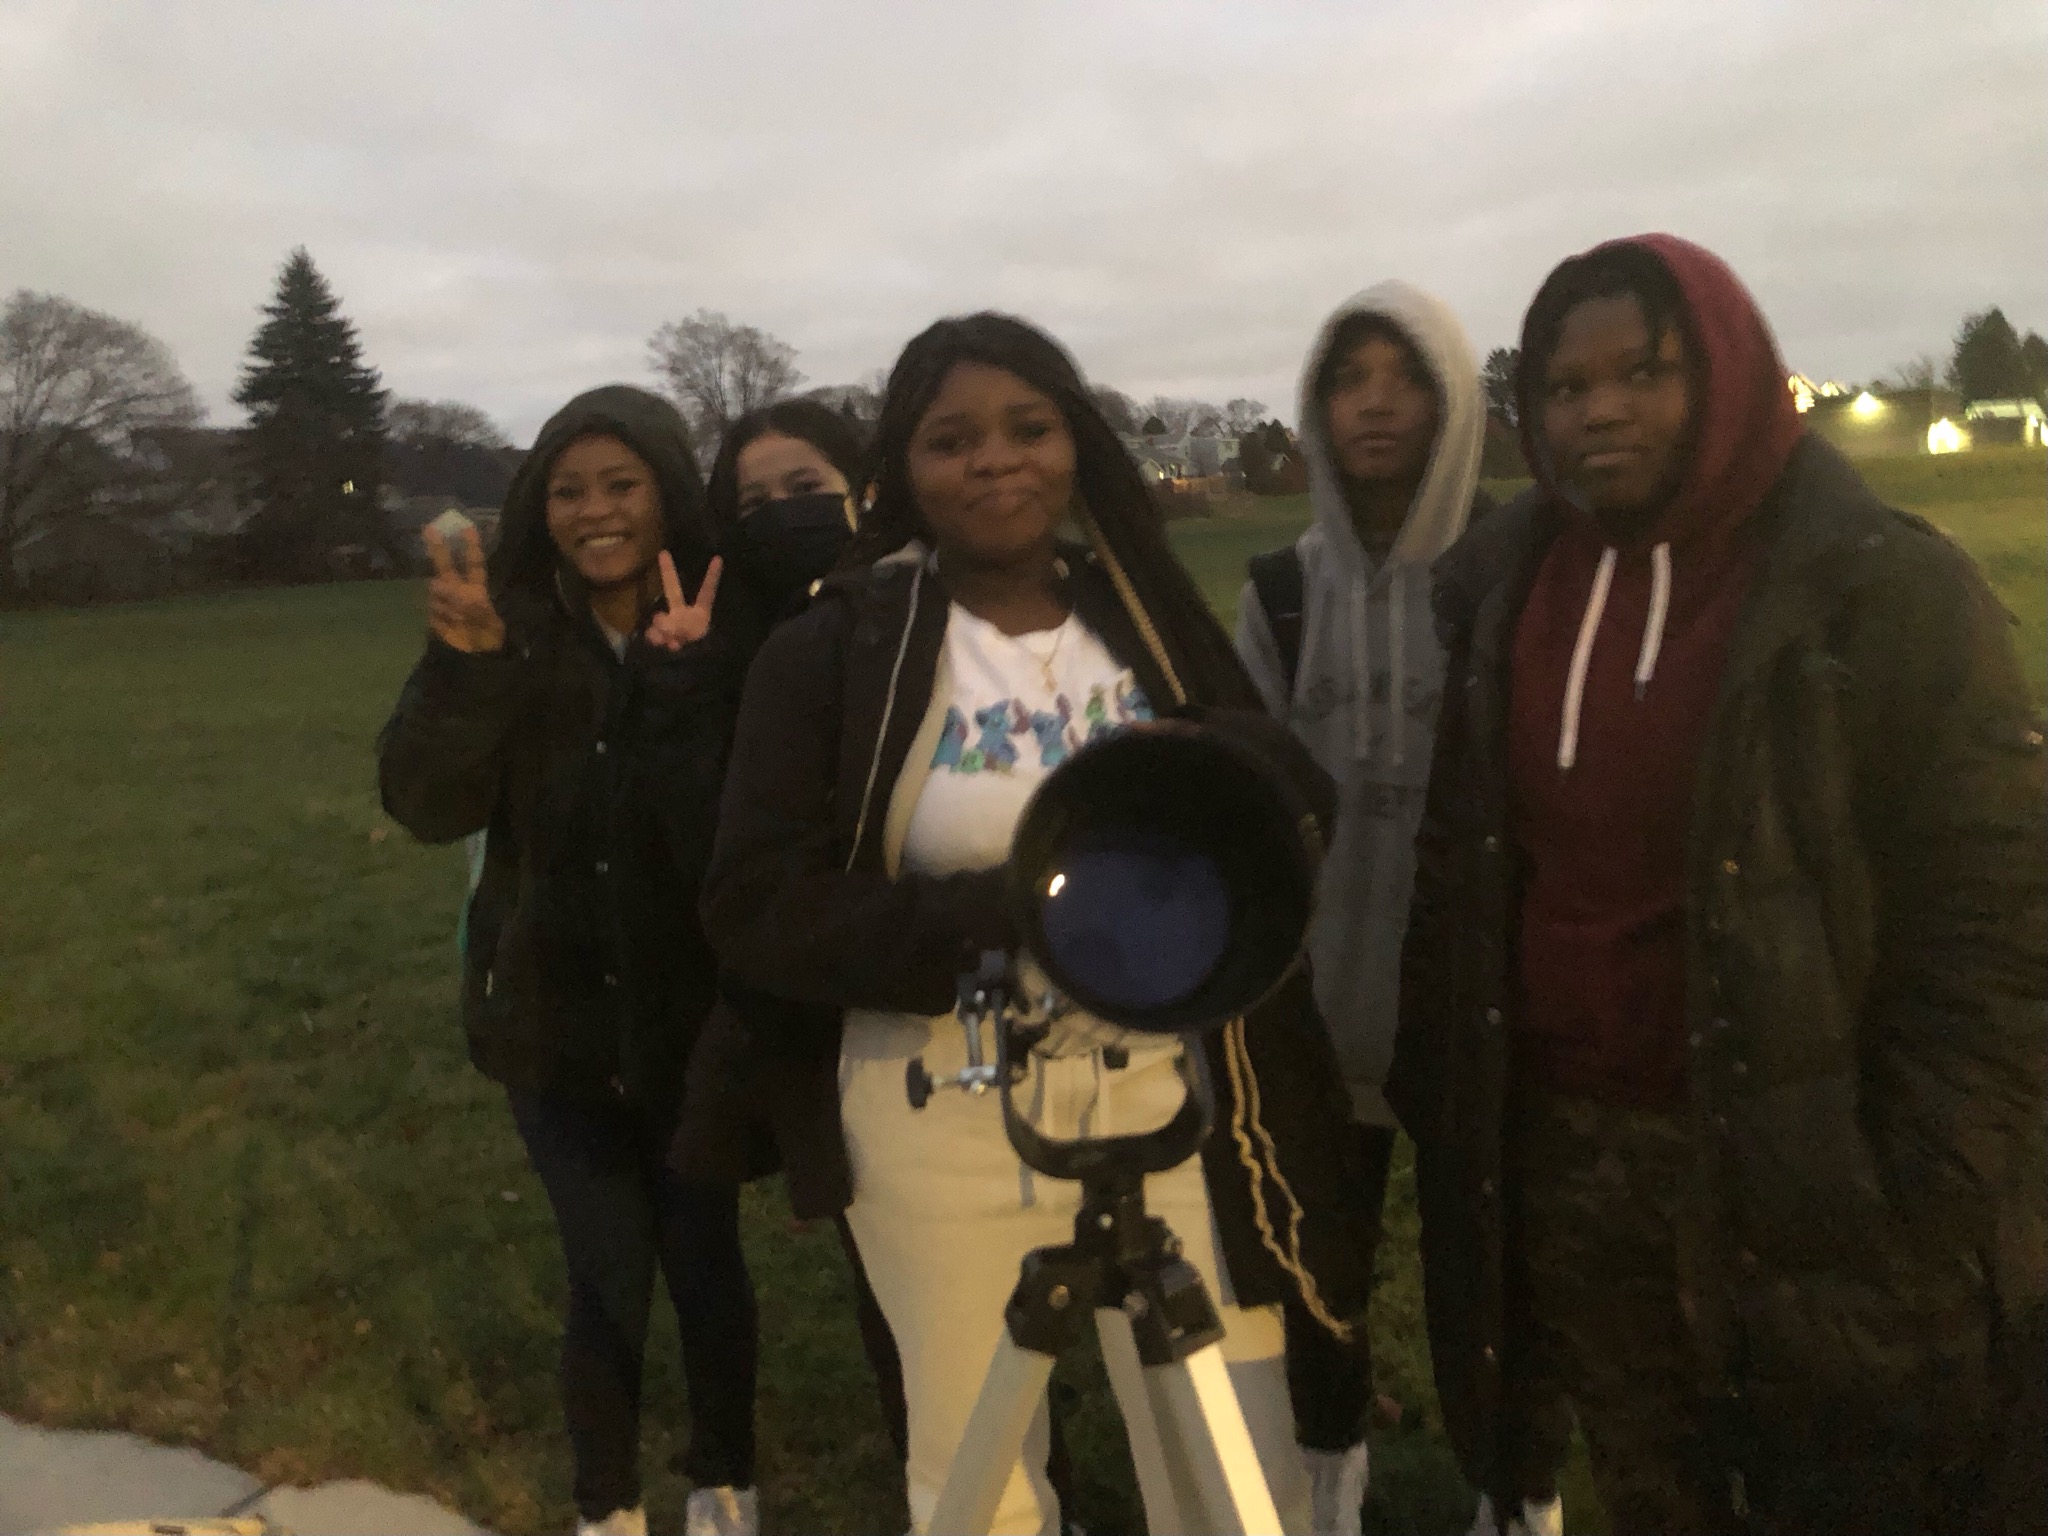 This is a photo of five Grant students standing next to a telescope outside their school building.